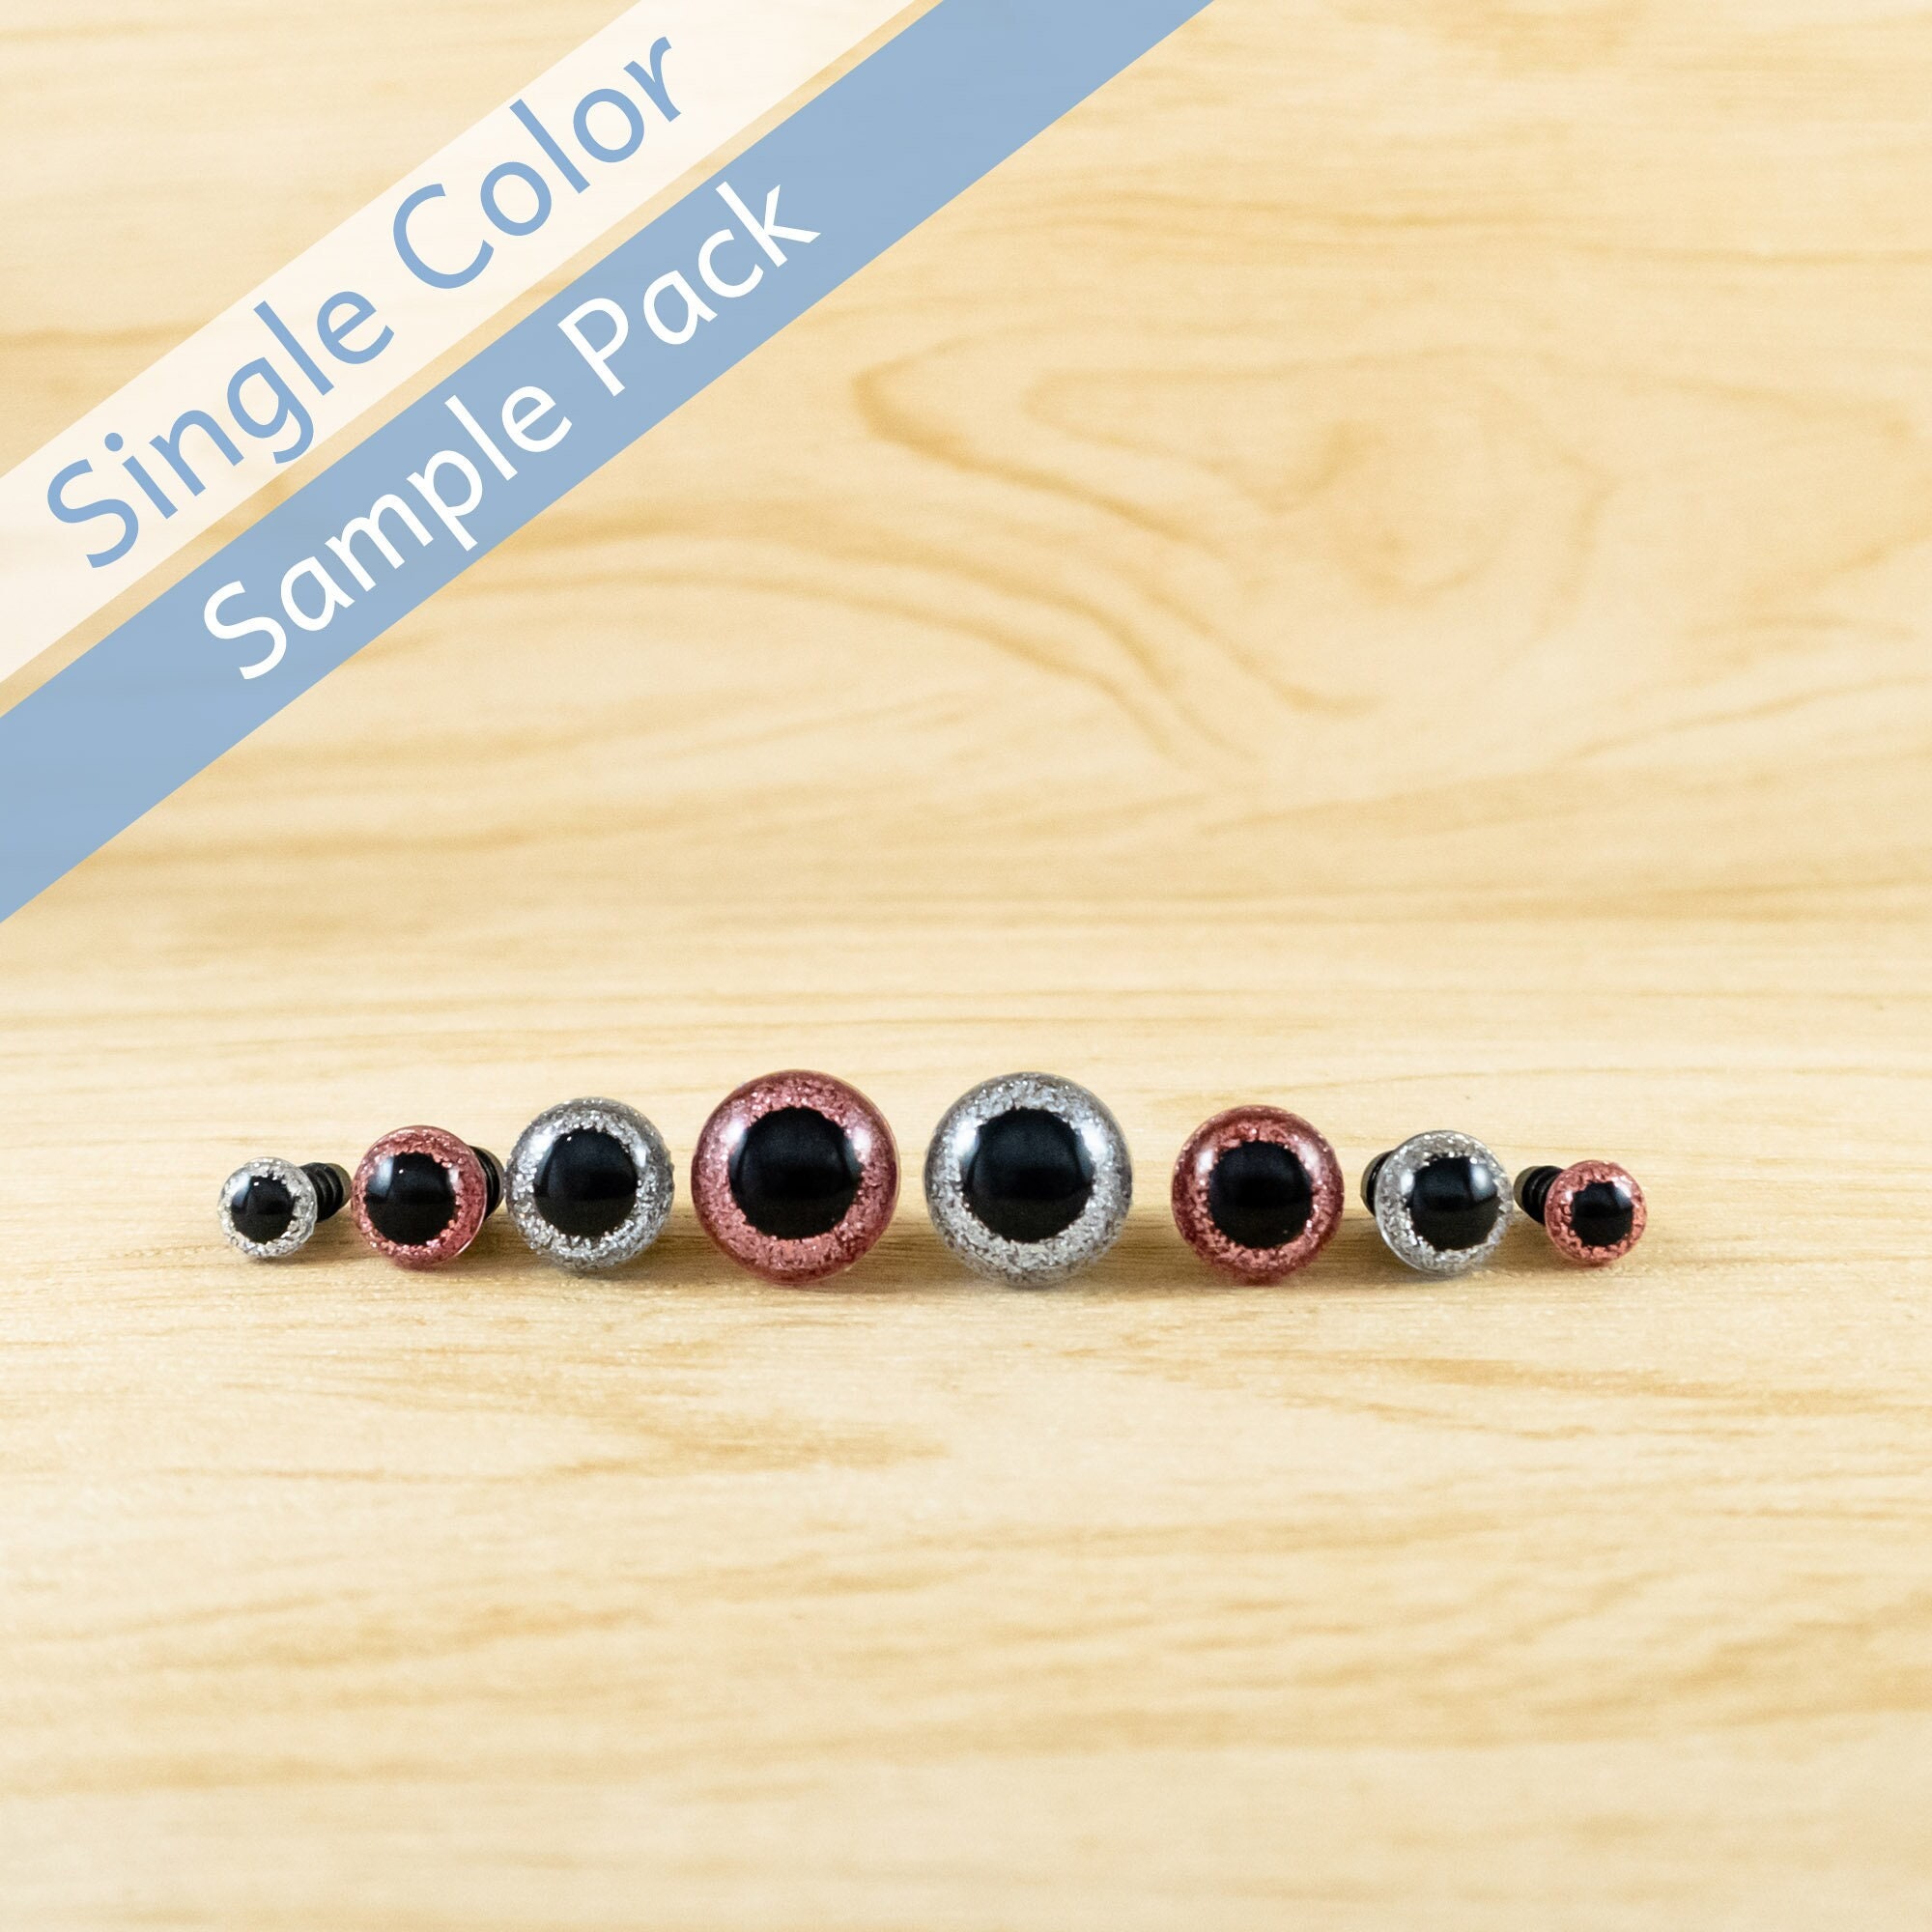 Black Safety Eyes Sample Pack - 4mm to 15mm, 5 pairs each size – Snacksies  Handicraft